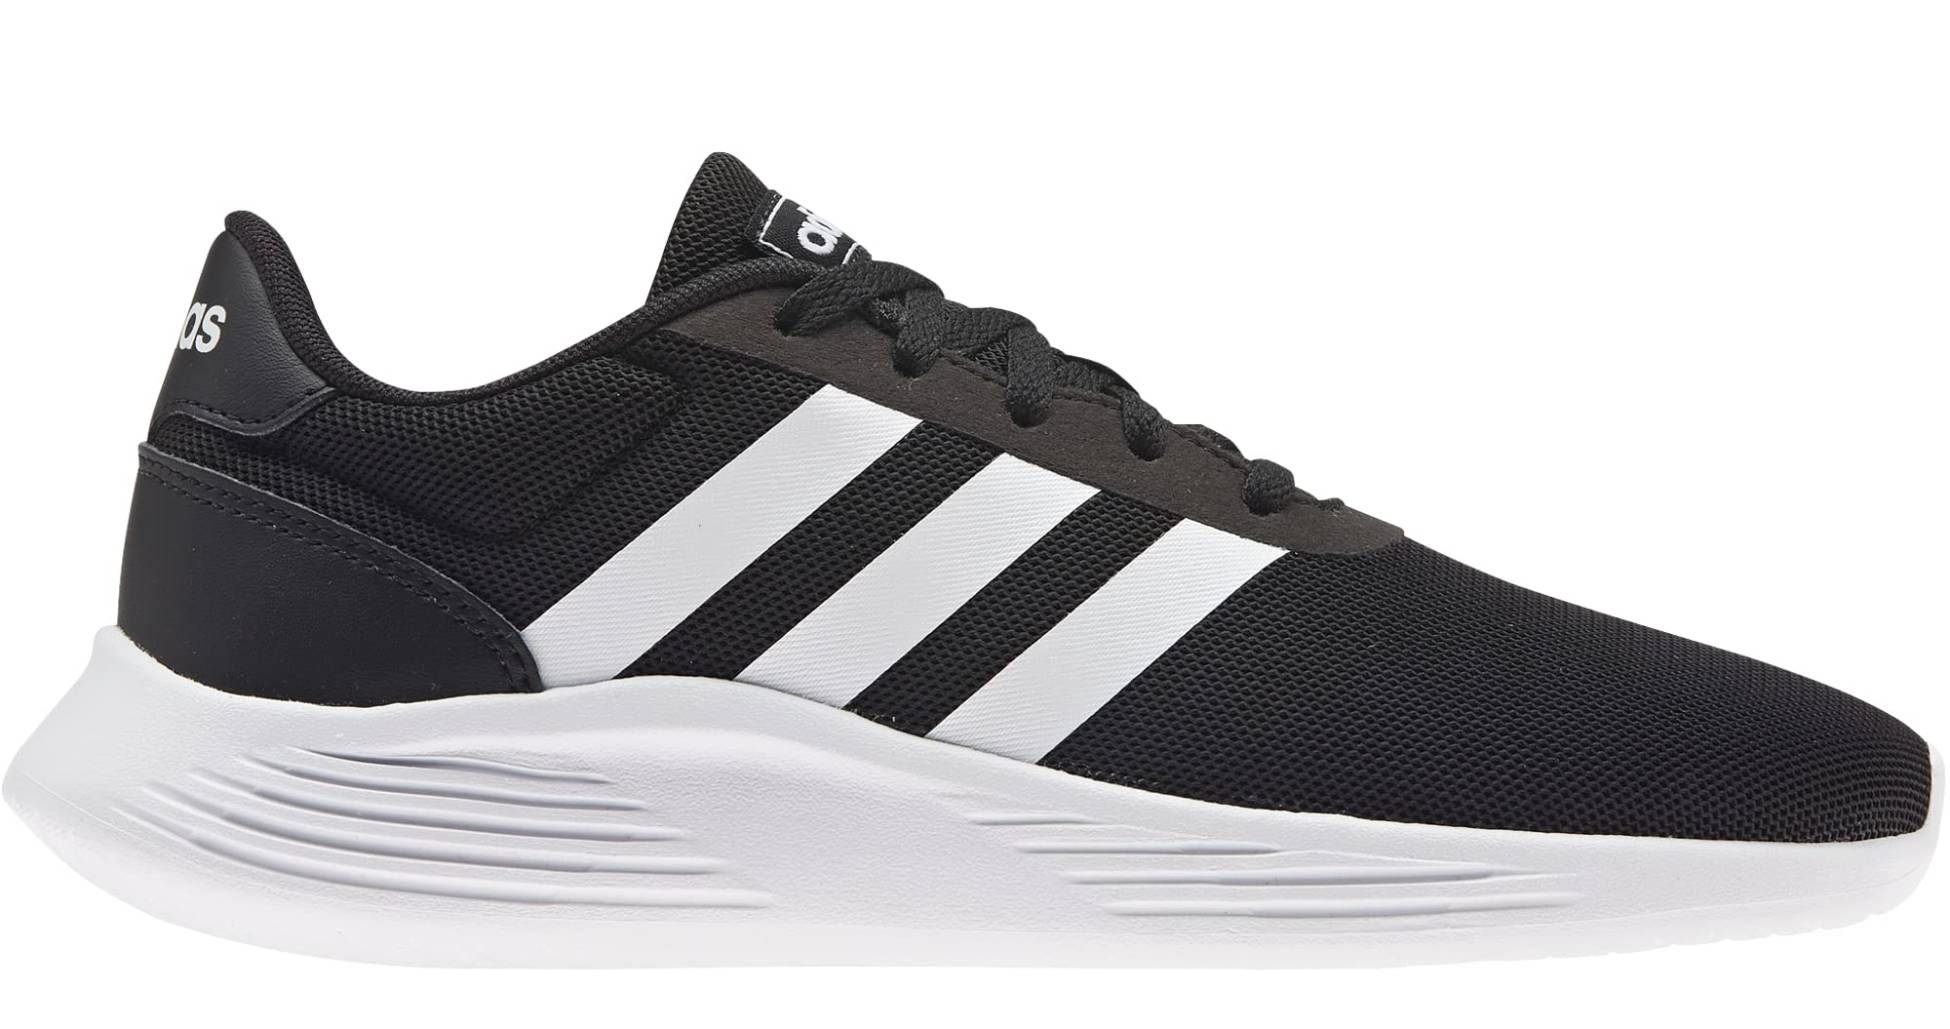 put forward Amazing Occupy Adidas Lite Racer 2.0 sneakers (only $32) | RunRepeat